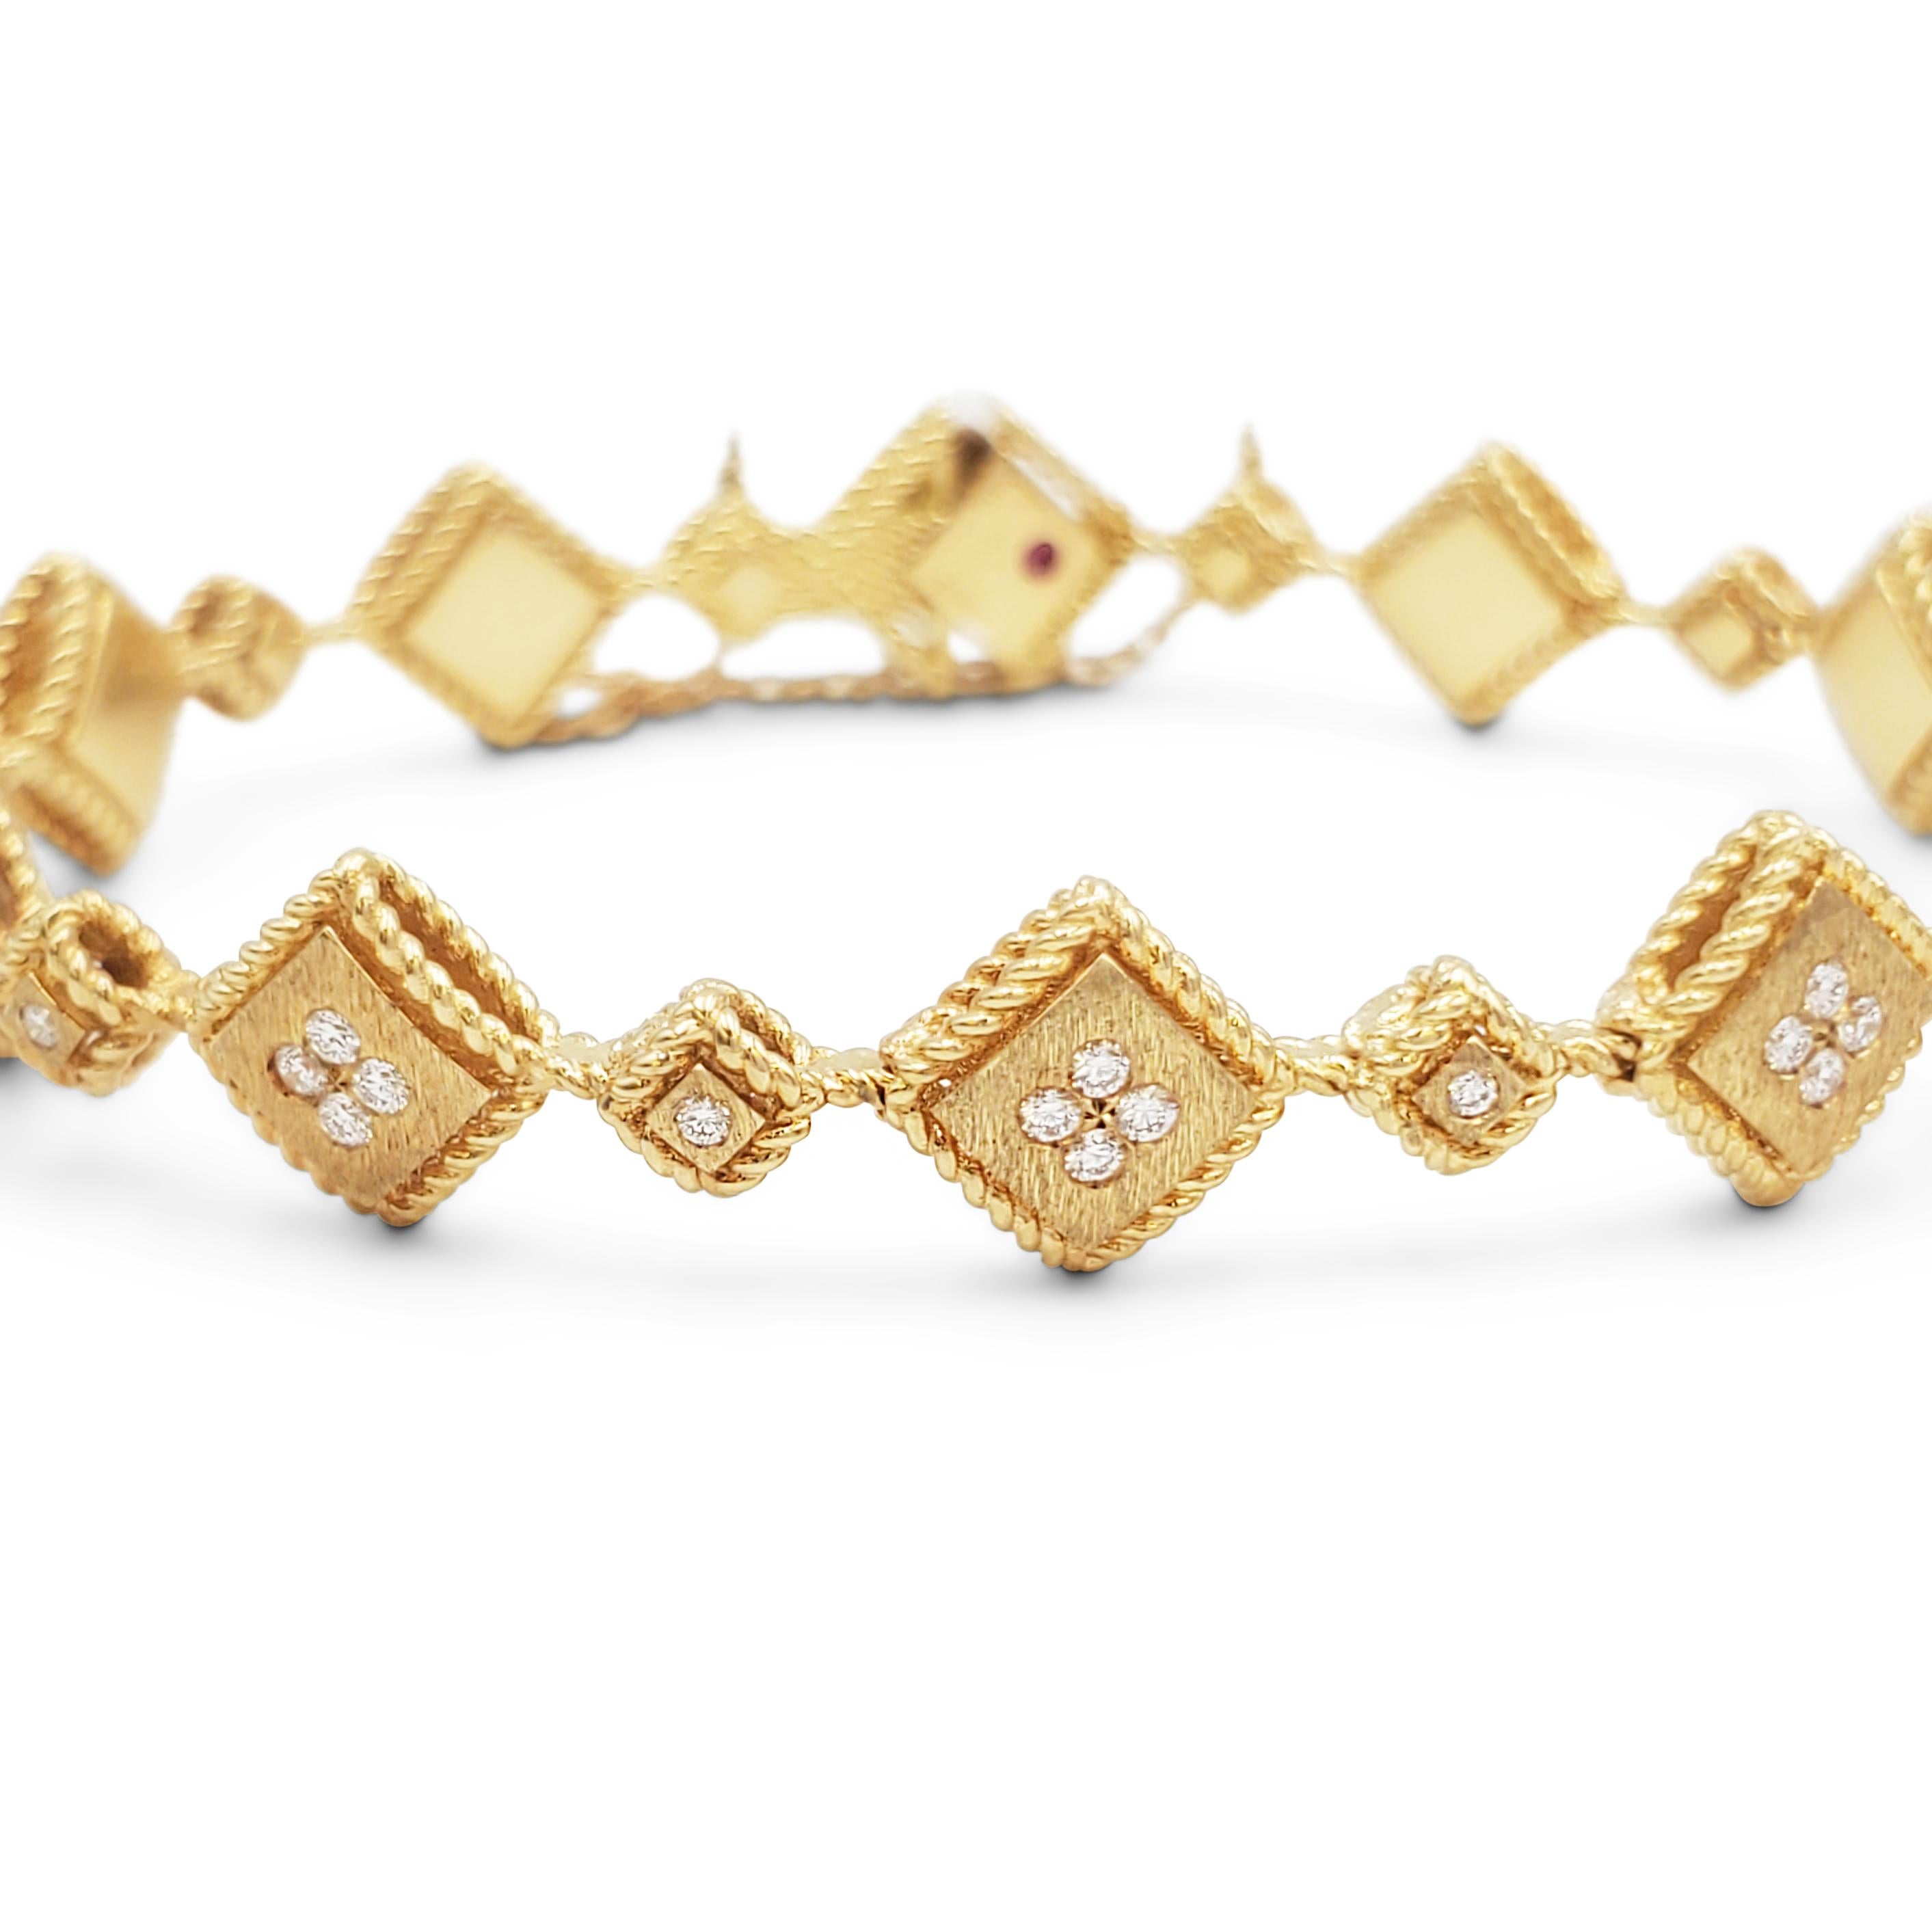 Authentic Roberto Coin bracelet from the Ducale collection crafted in 18 karat yellow gold.  Comprised of alternating links of large and small satin finish gold squares with high polished gold rope borders. Each link is accented by sparkling round